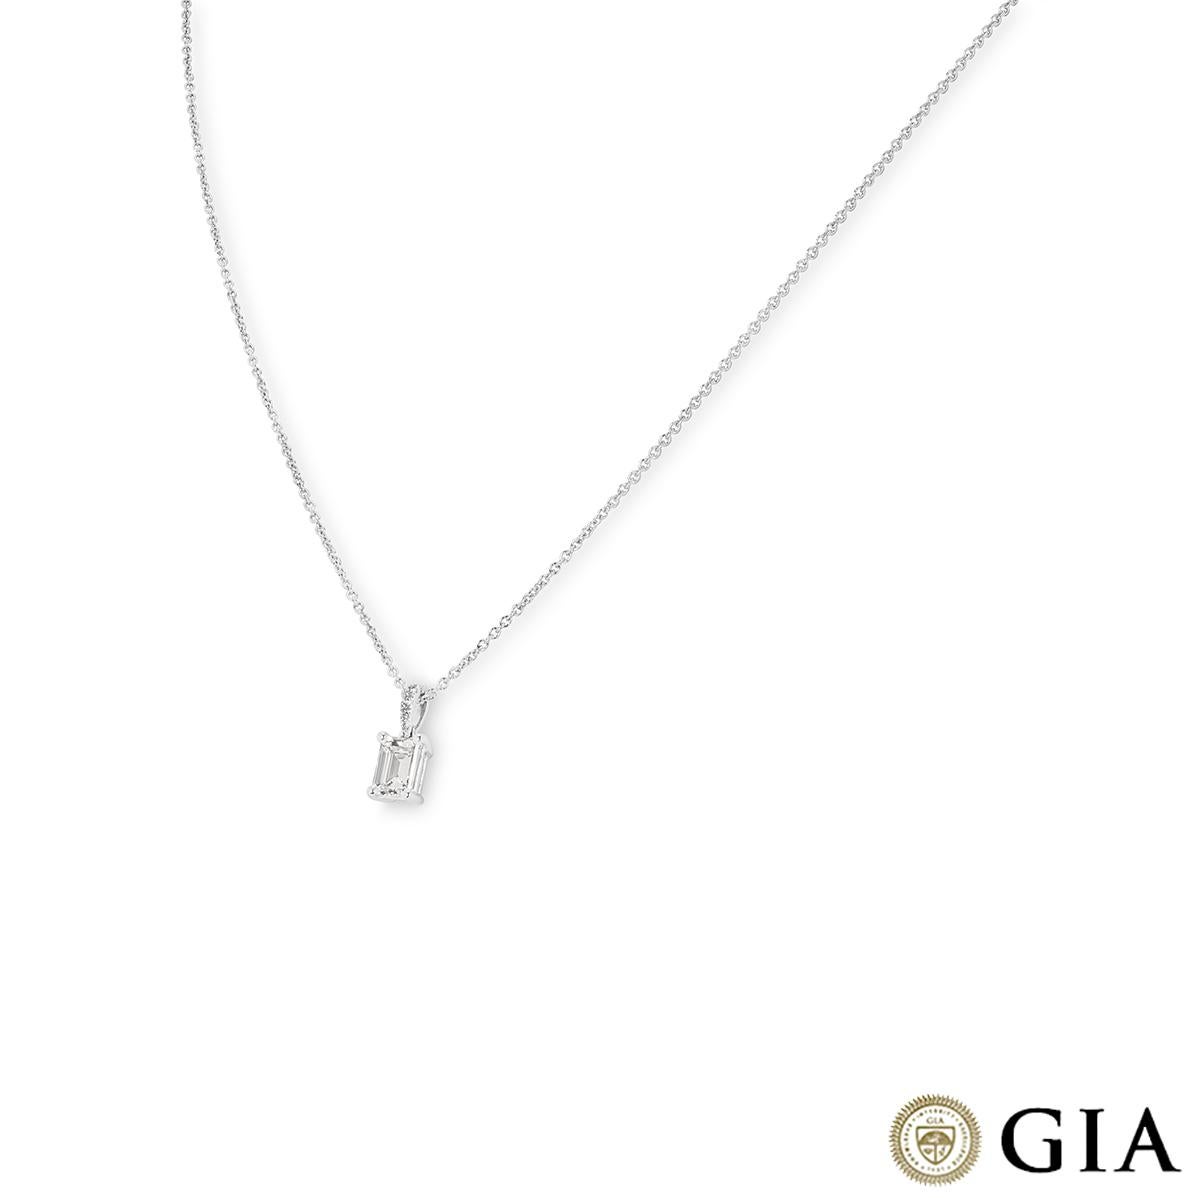 An elegant 18k white gold diamond pendant. The pendant features an emerald cut diamond weighing 0.92ct, G colour and SI1 clarity freely moving below a diamond set bail. The bail is pave set with 5 round brilliant cut diamonds with an approximate